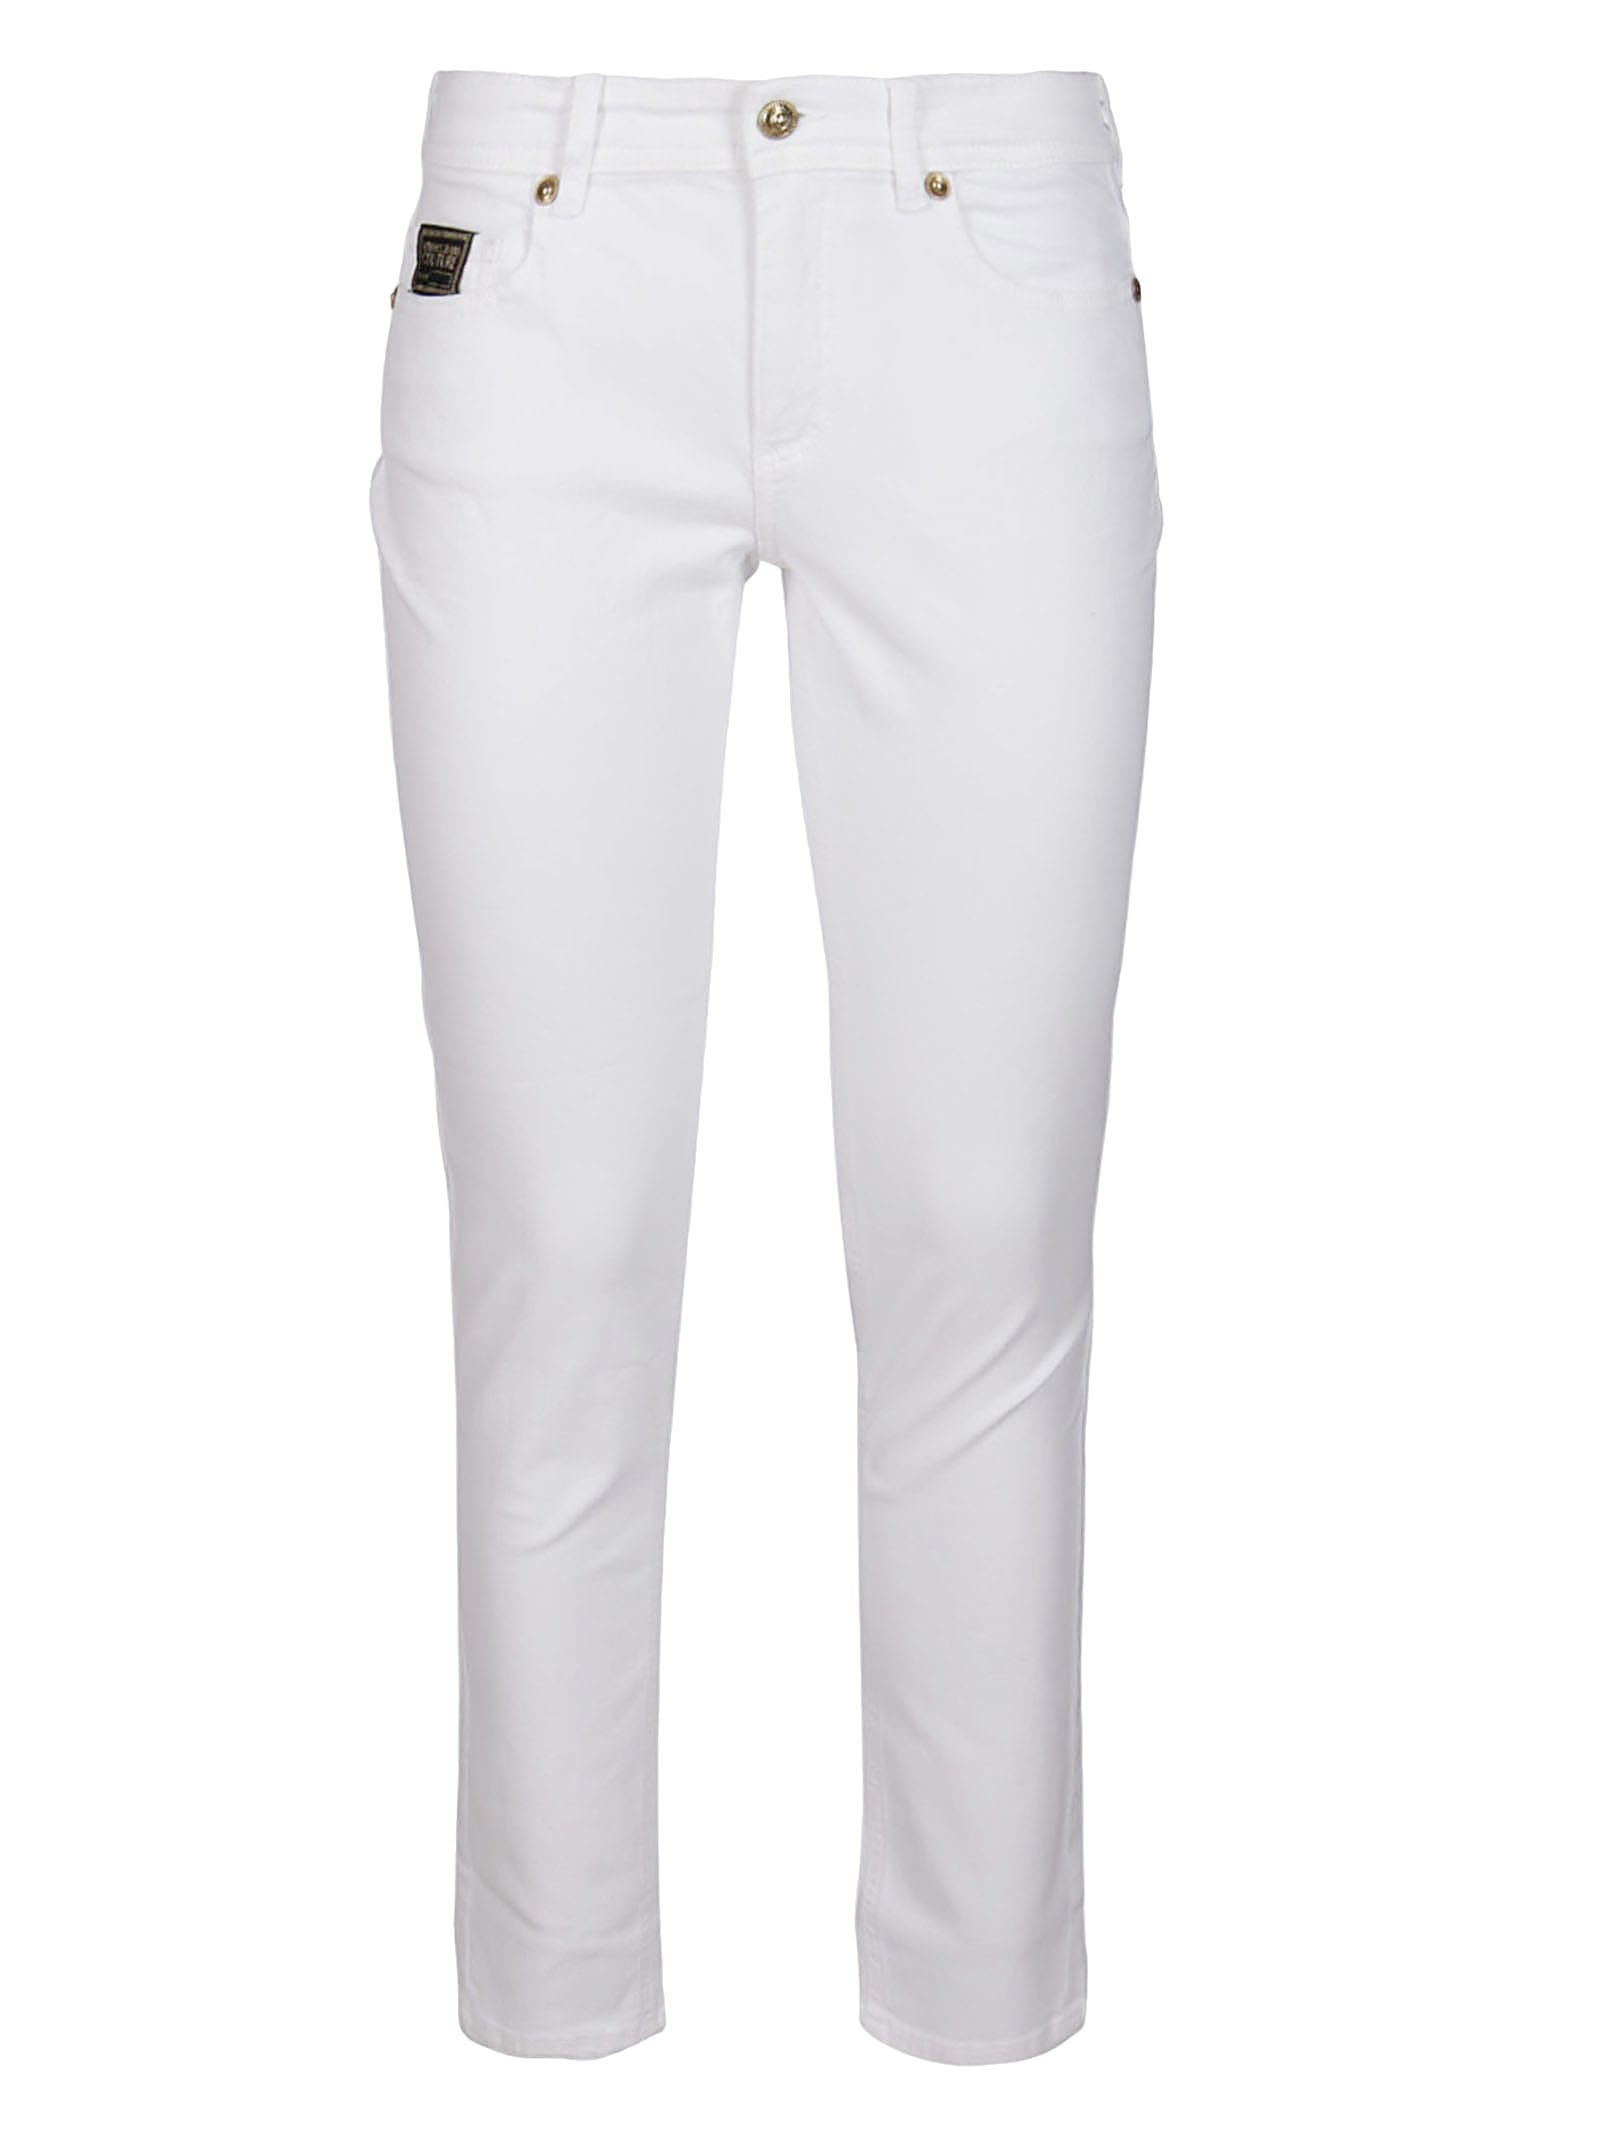 VERSACE JEANS COUTURE WHITE COTTON JEANS,11822685